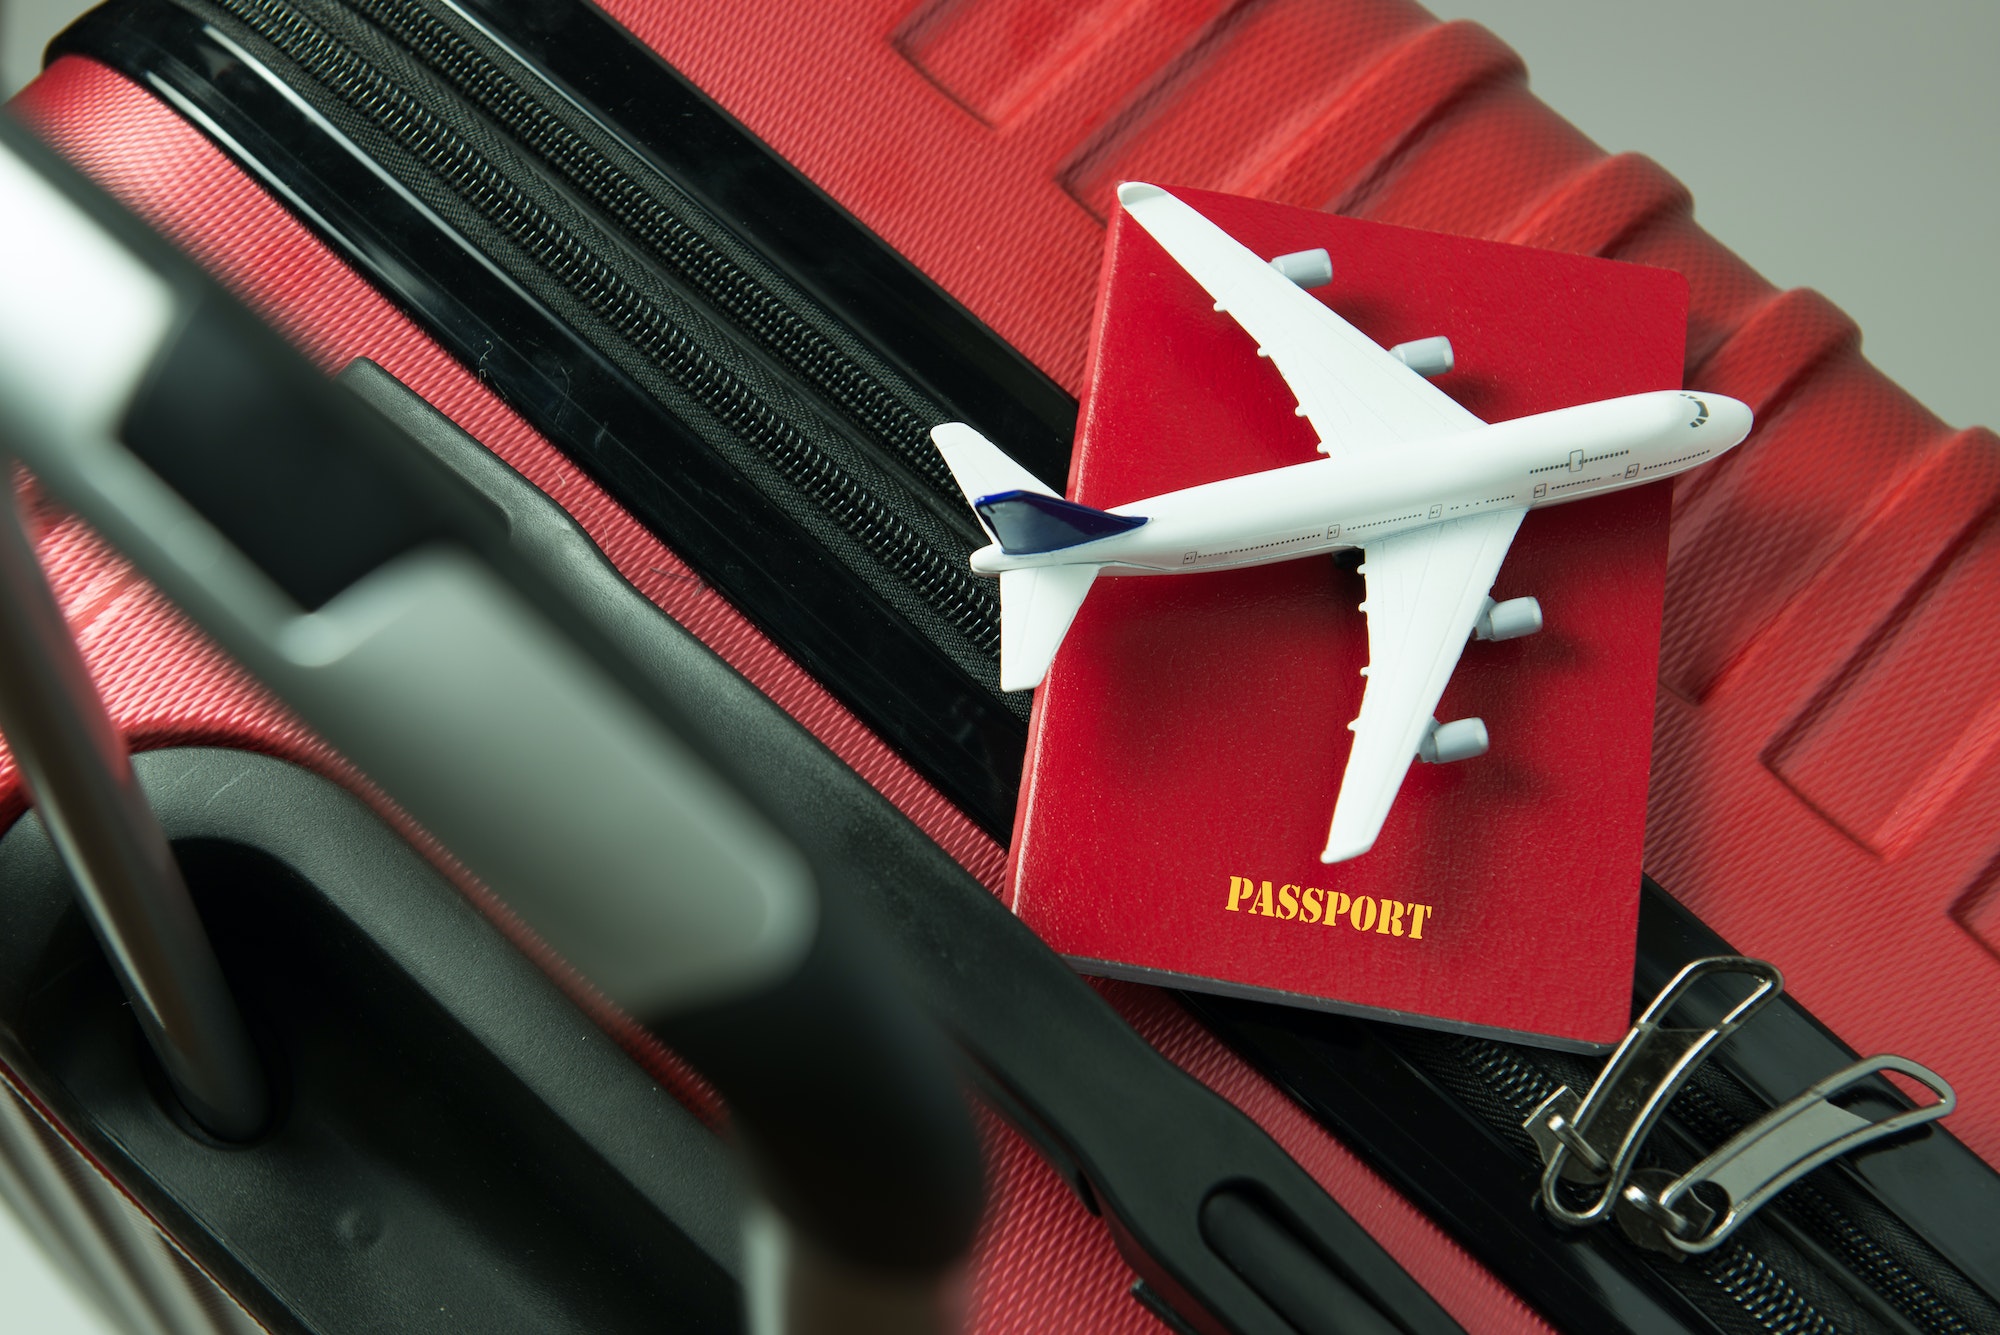 Red passport and airplane model on red luggage